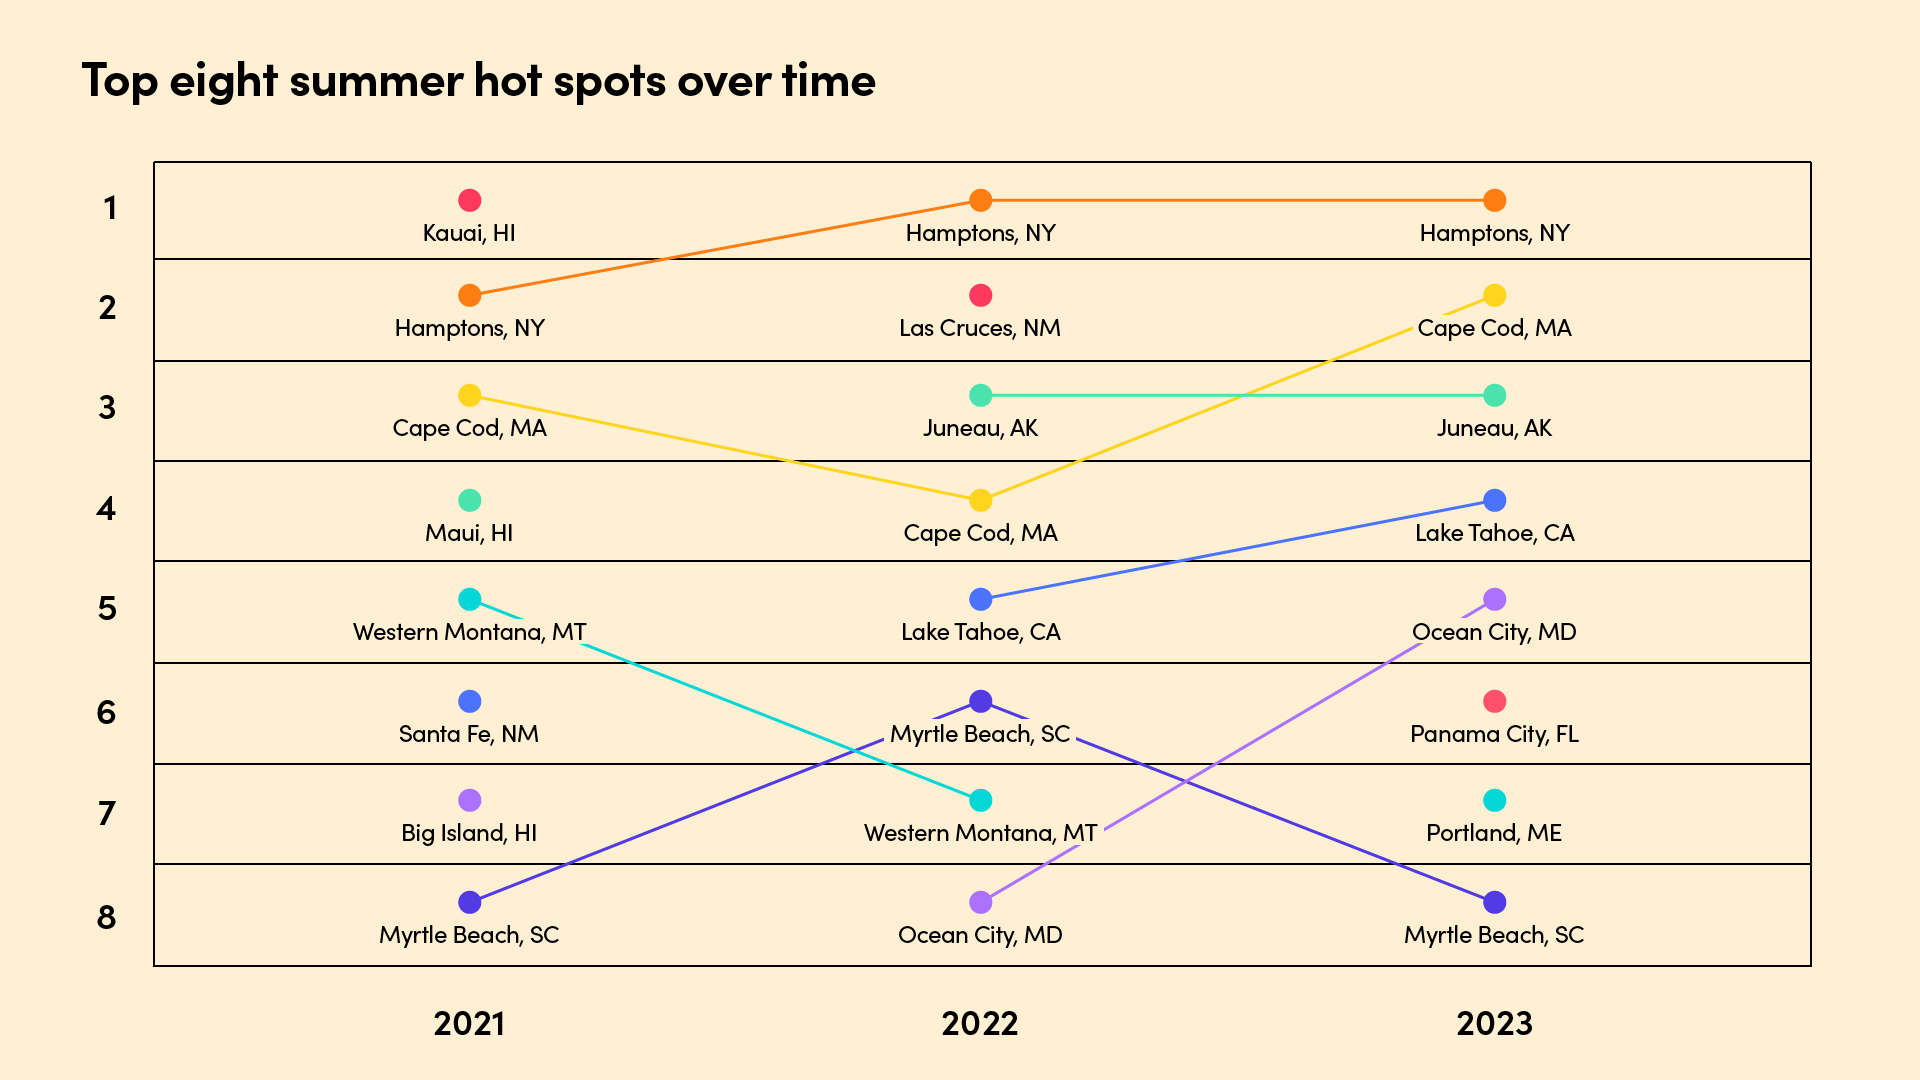 Summer hot spots over time